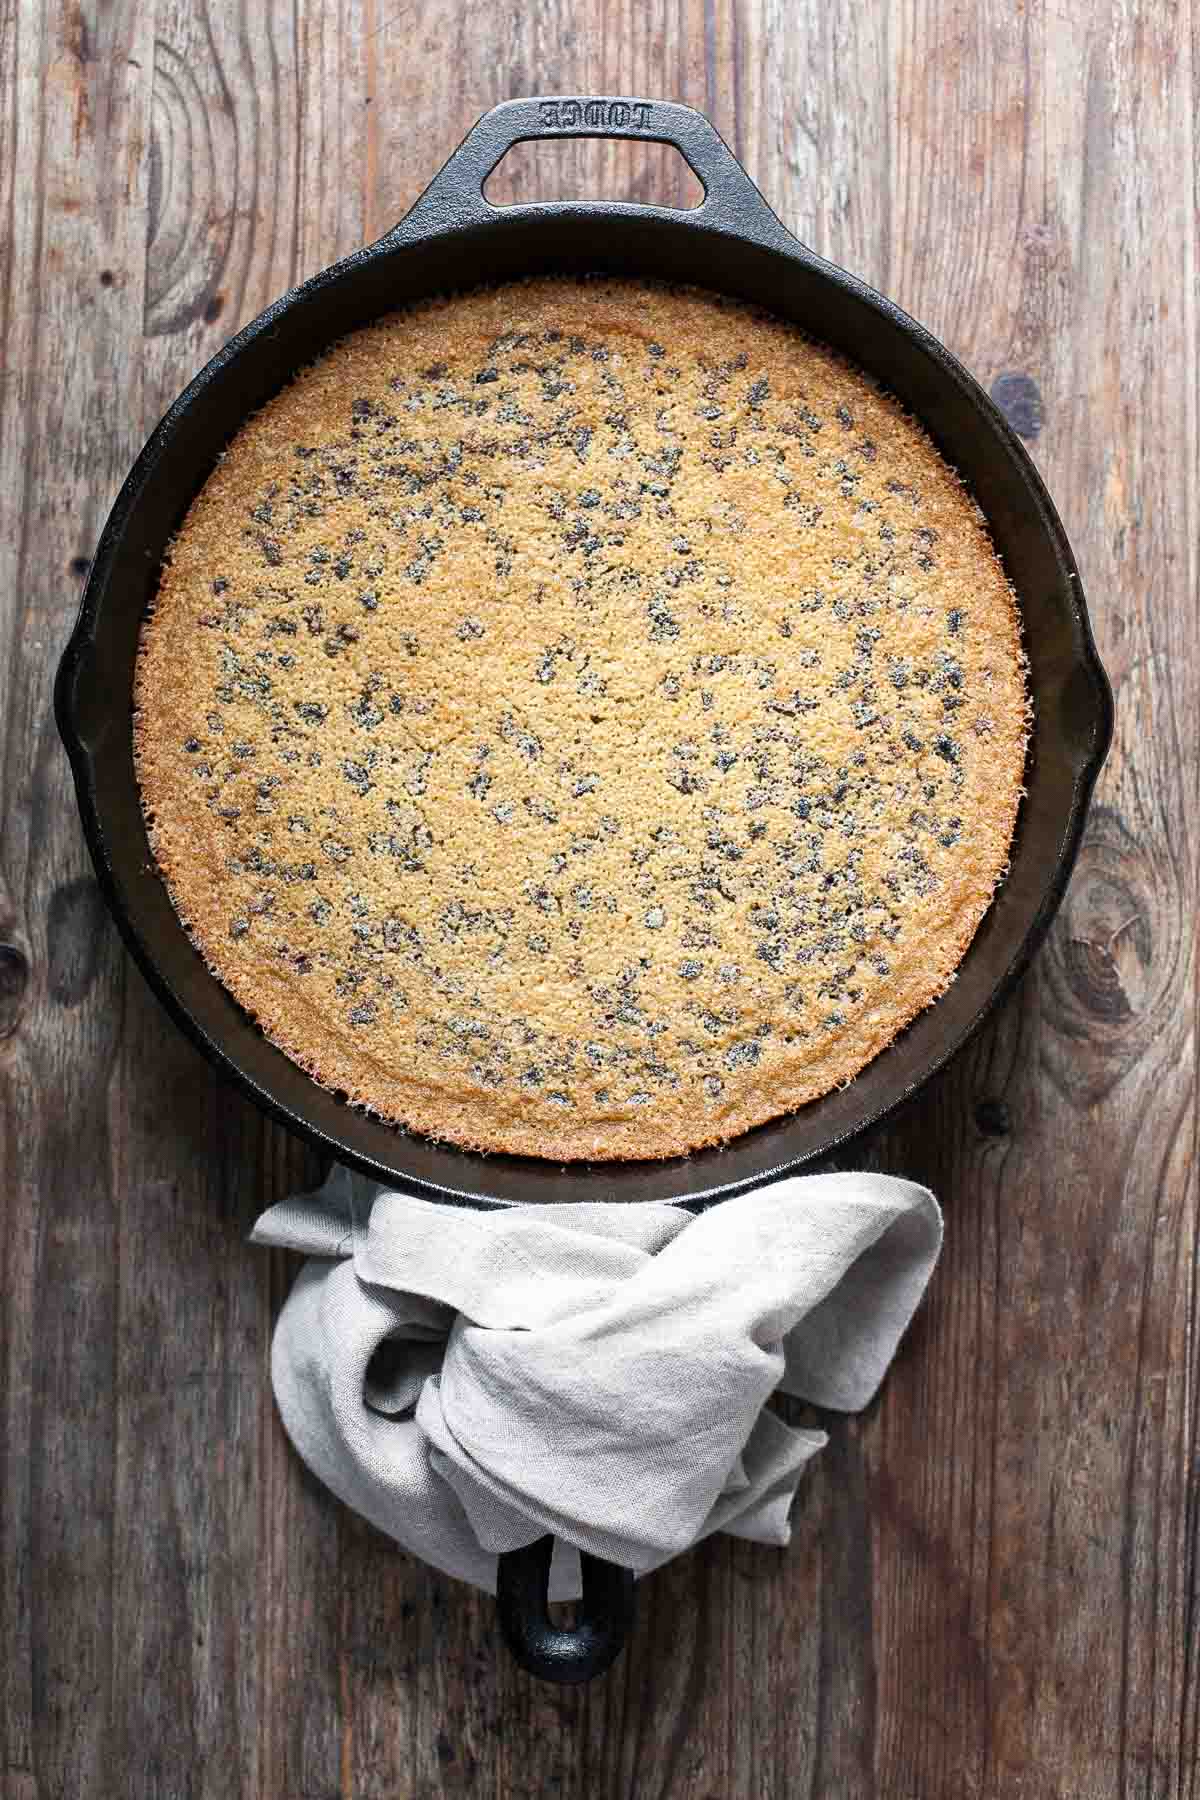 Brown Butter Cacao Nib Skillet Cake (Gluten free, Grain free) | acalculatedwhisk.com